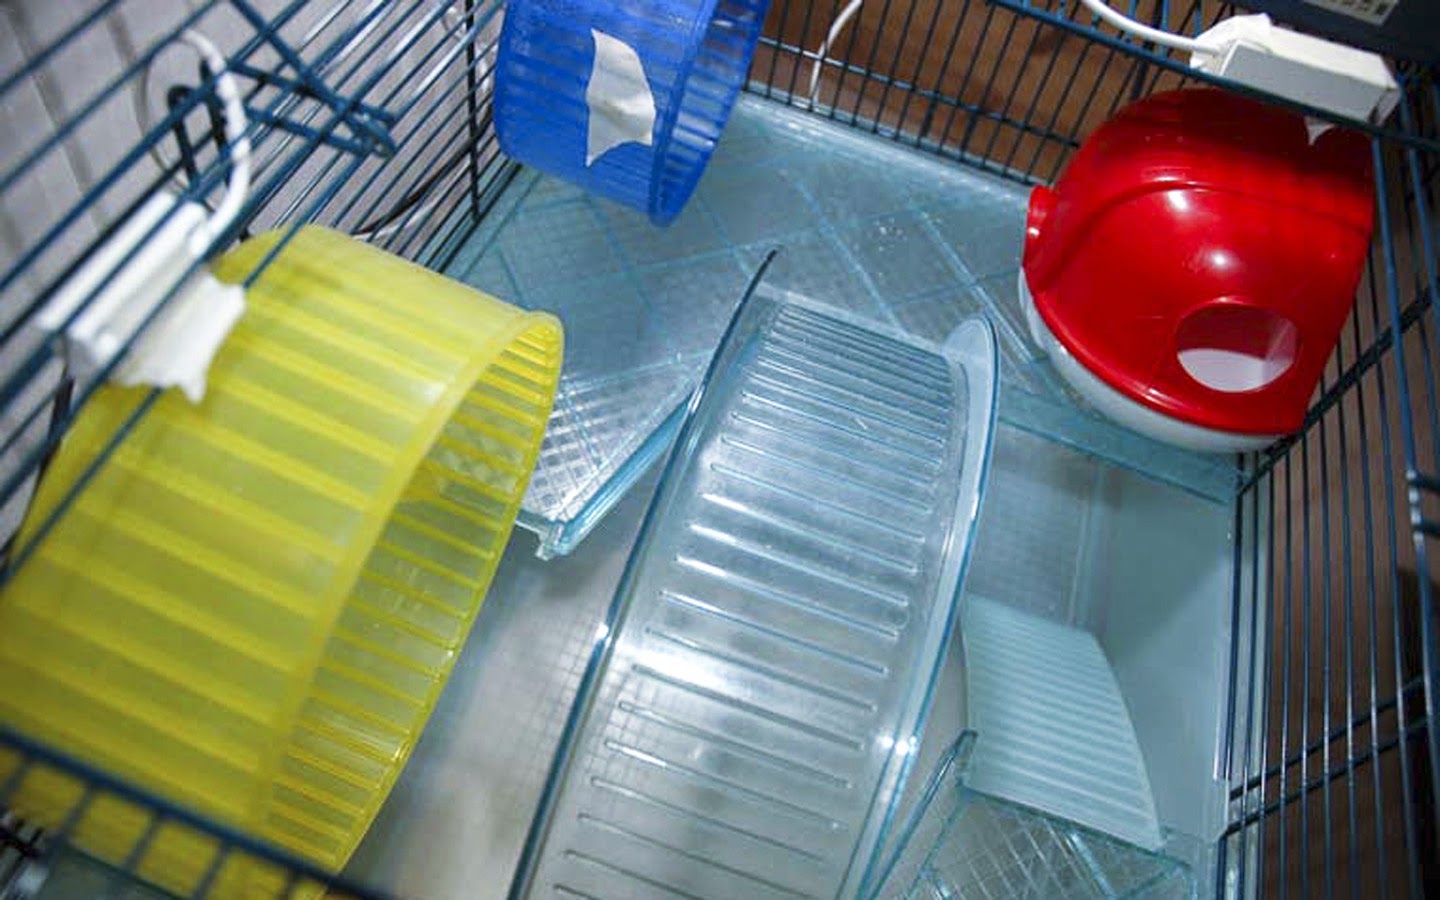 The image shows a close-up of a sensor device covered in silver duct tape, attached to the top bars of a hamster cage, possibly used for monitoring the hamster's wheel activity or behavior.